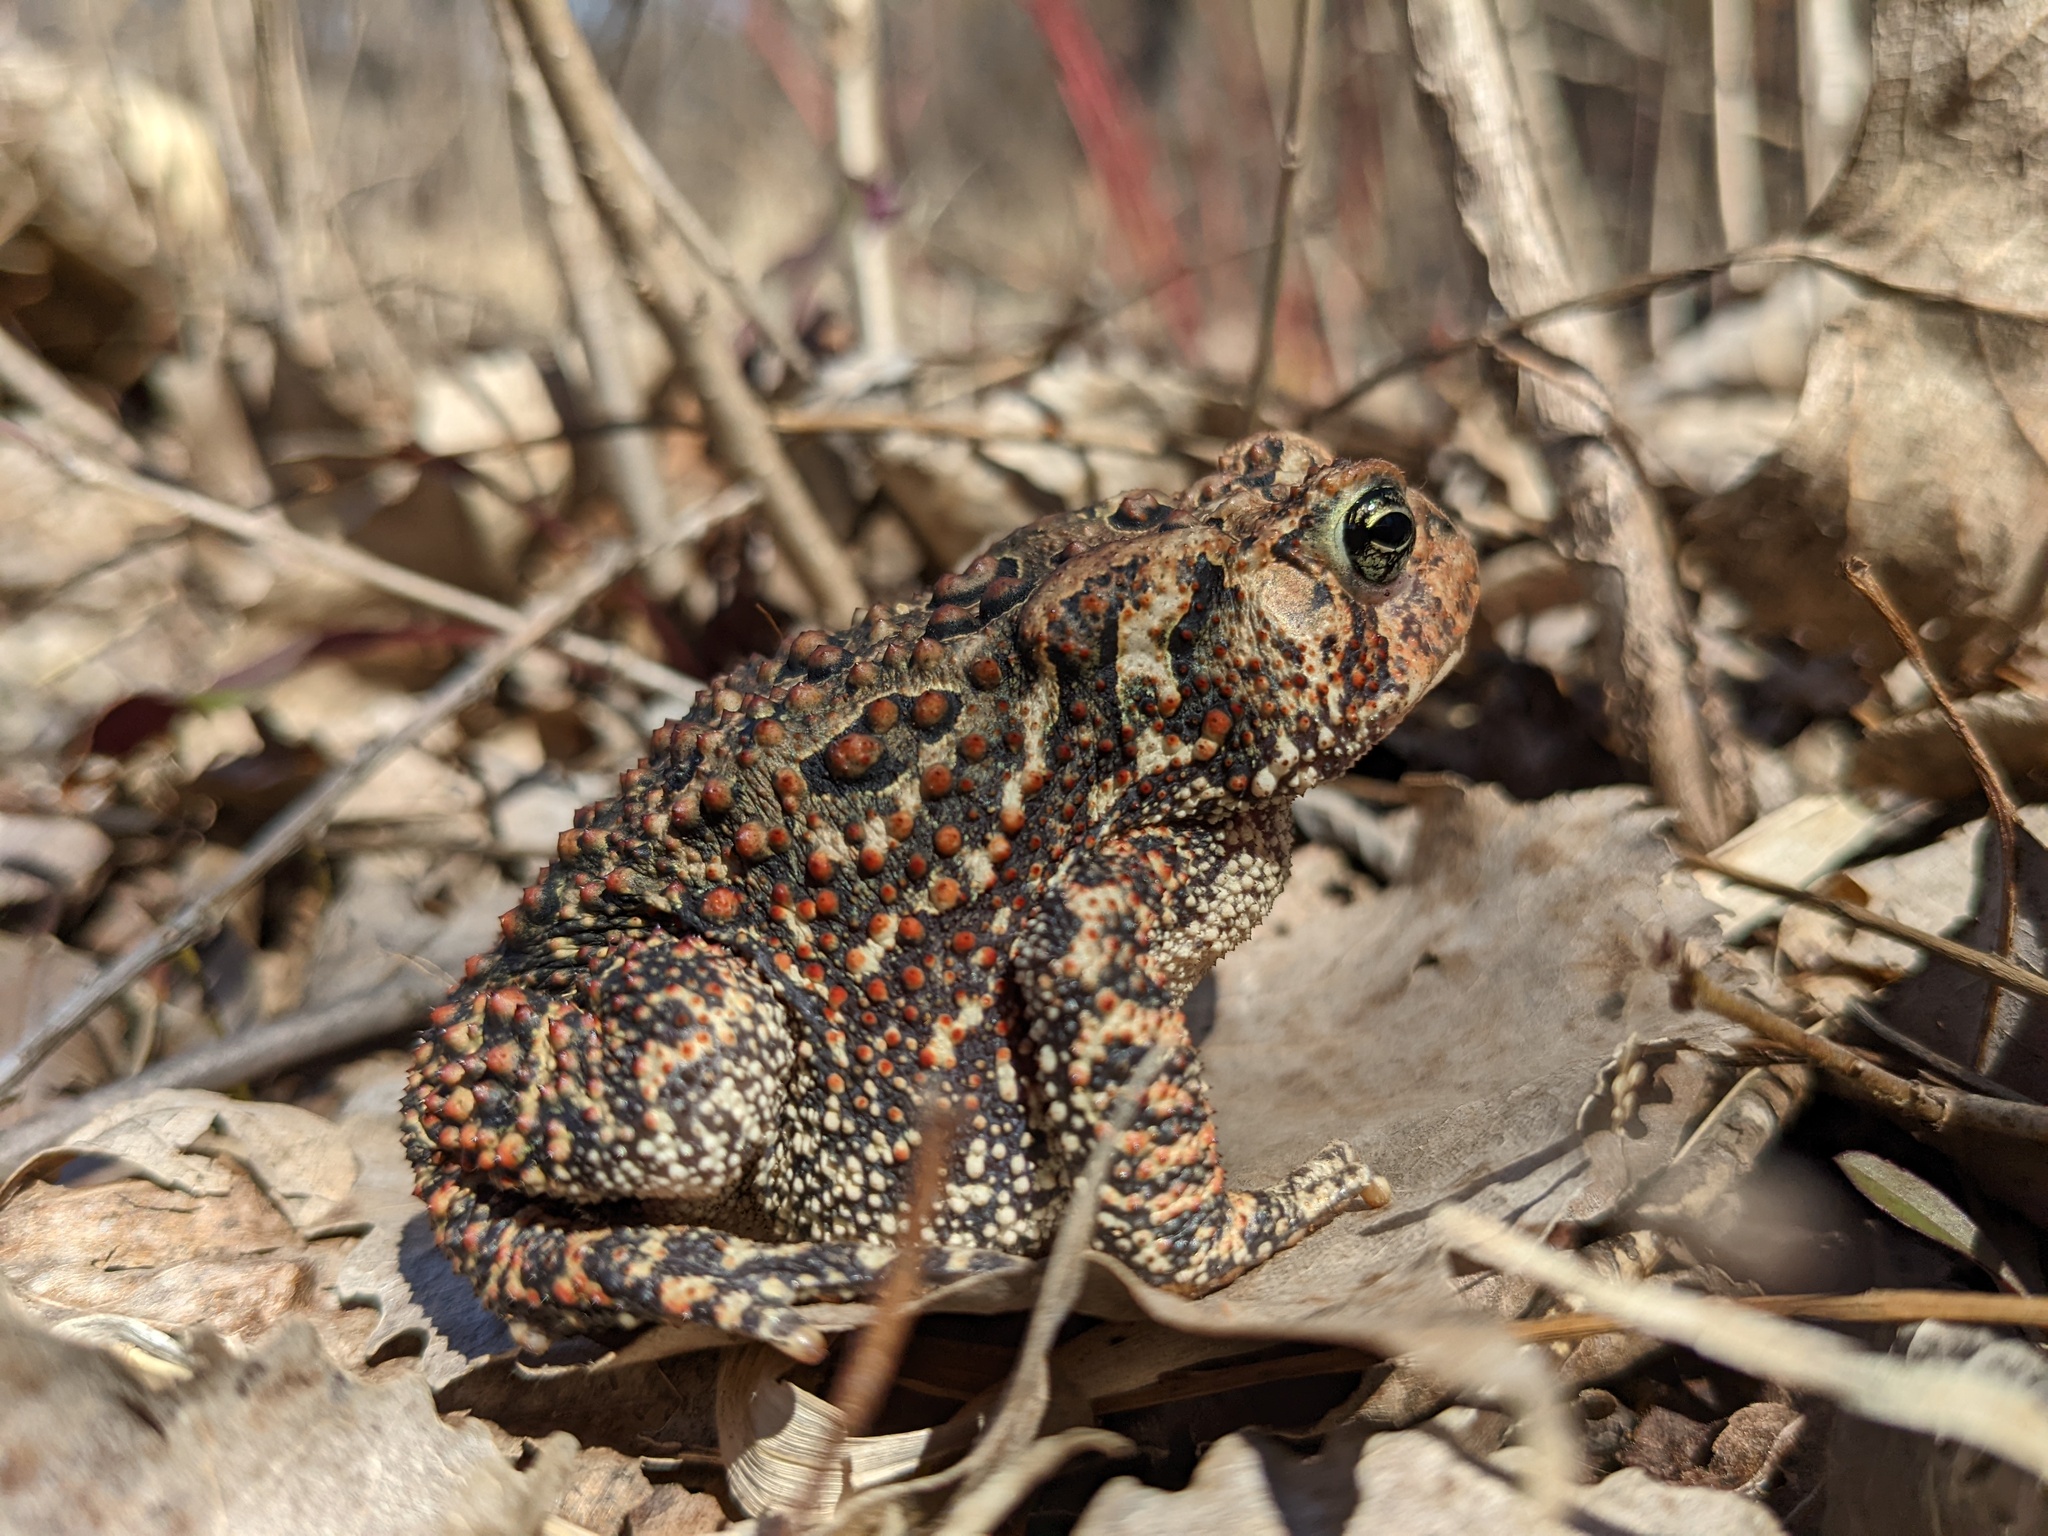 American toad on leaf litter. Its skin is bumpy and mottled in shades of dark and light browns.